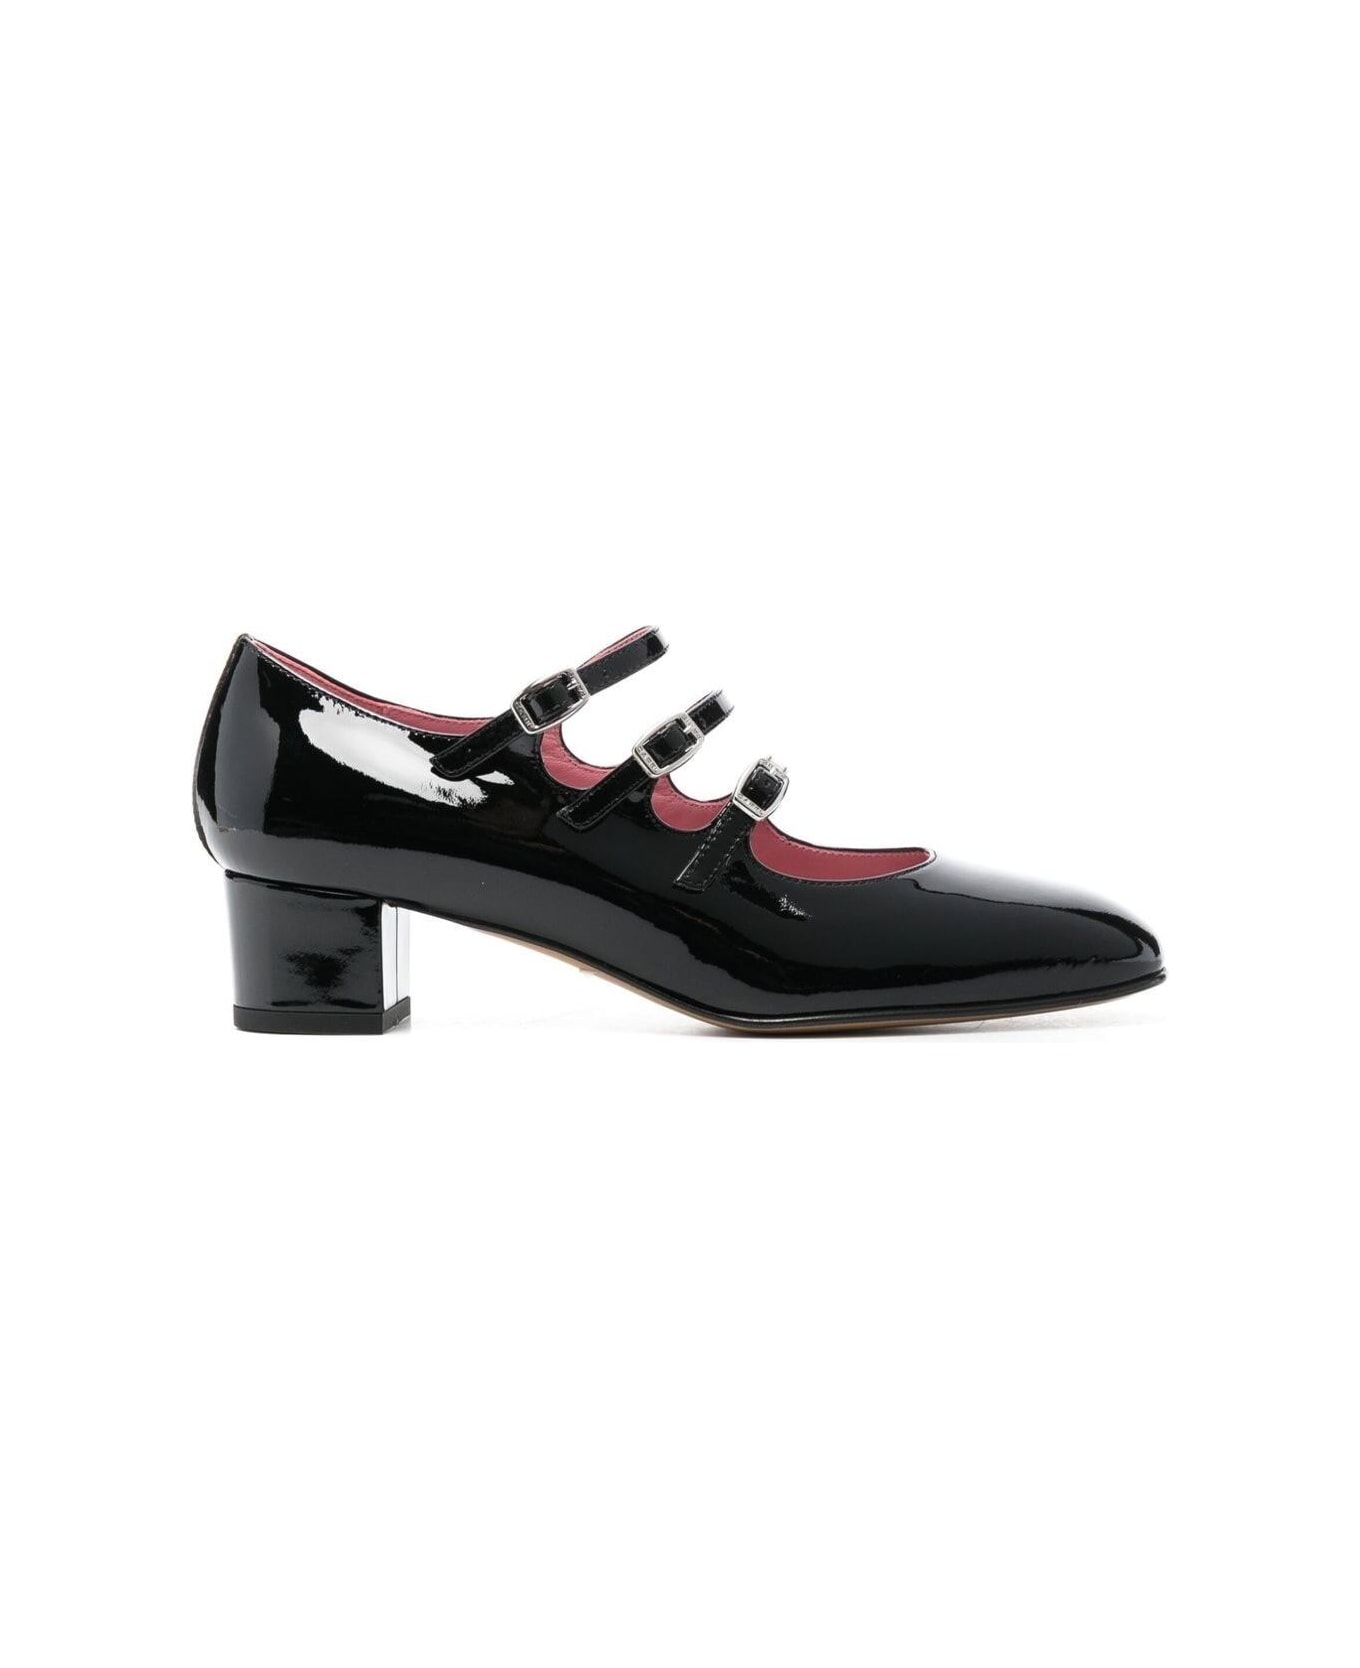 Carel 'kina' Black Mary Janes With Straps And Block Heel In Patent Leather Woman - Black